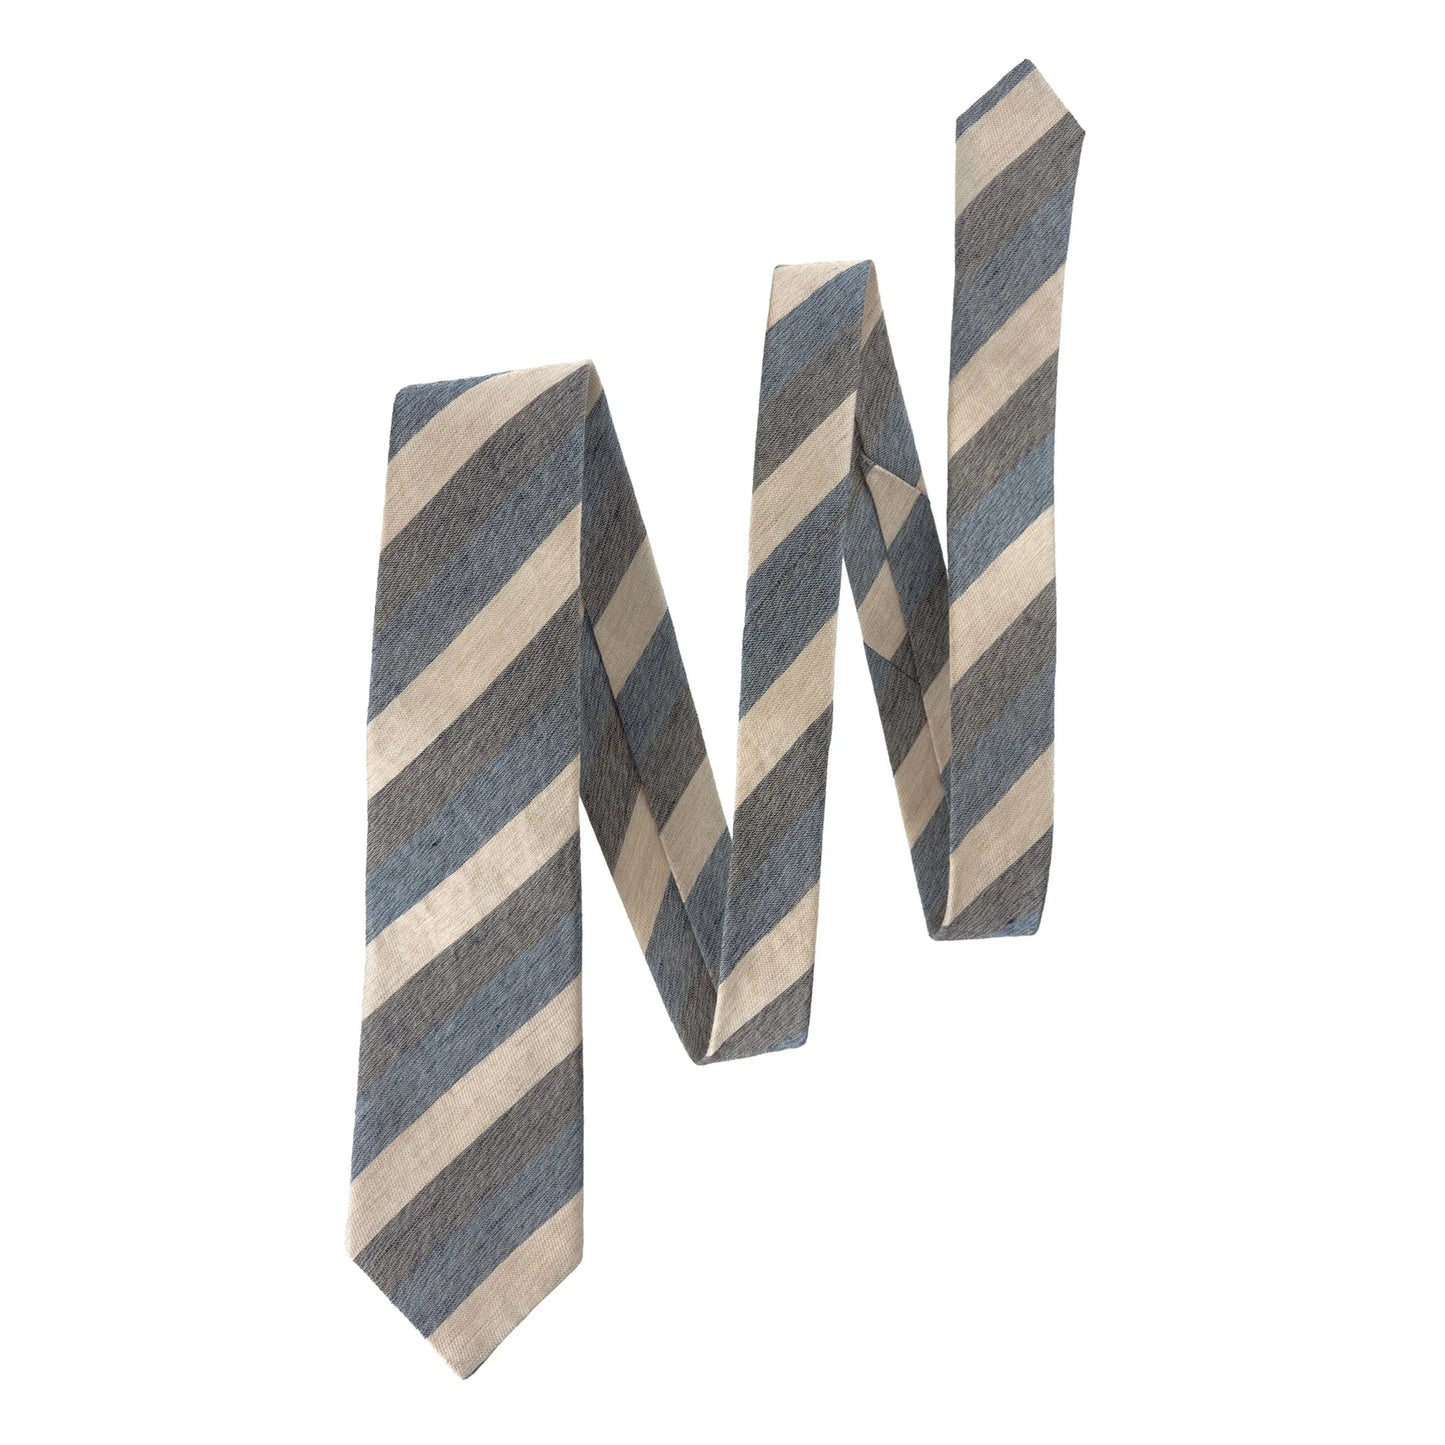 Striped Silk and Linen-Blend Tie in Beige, Blue and Grey